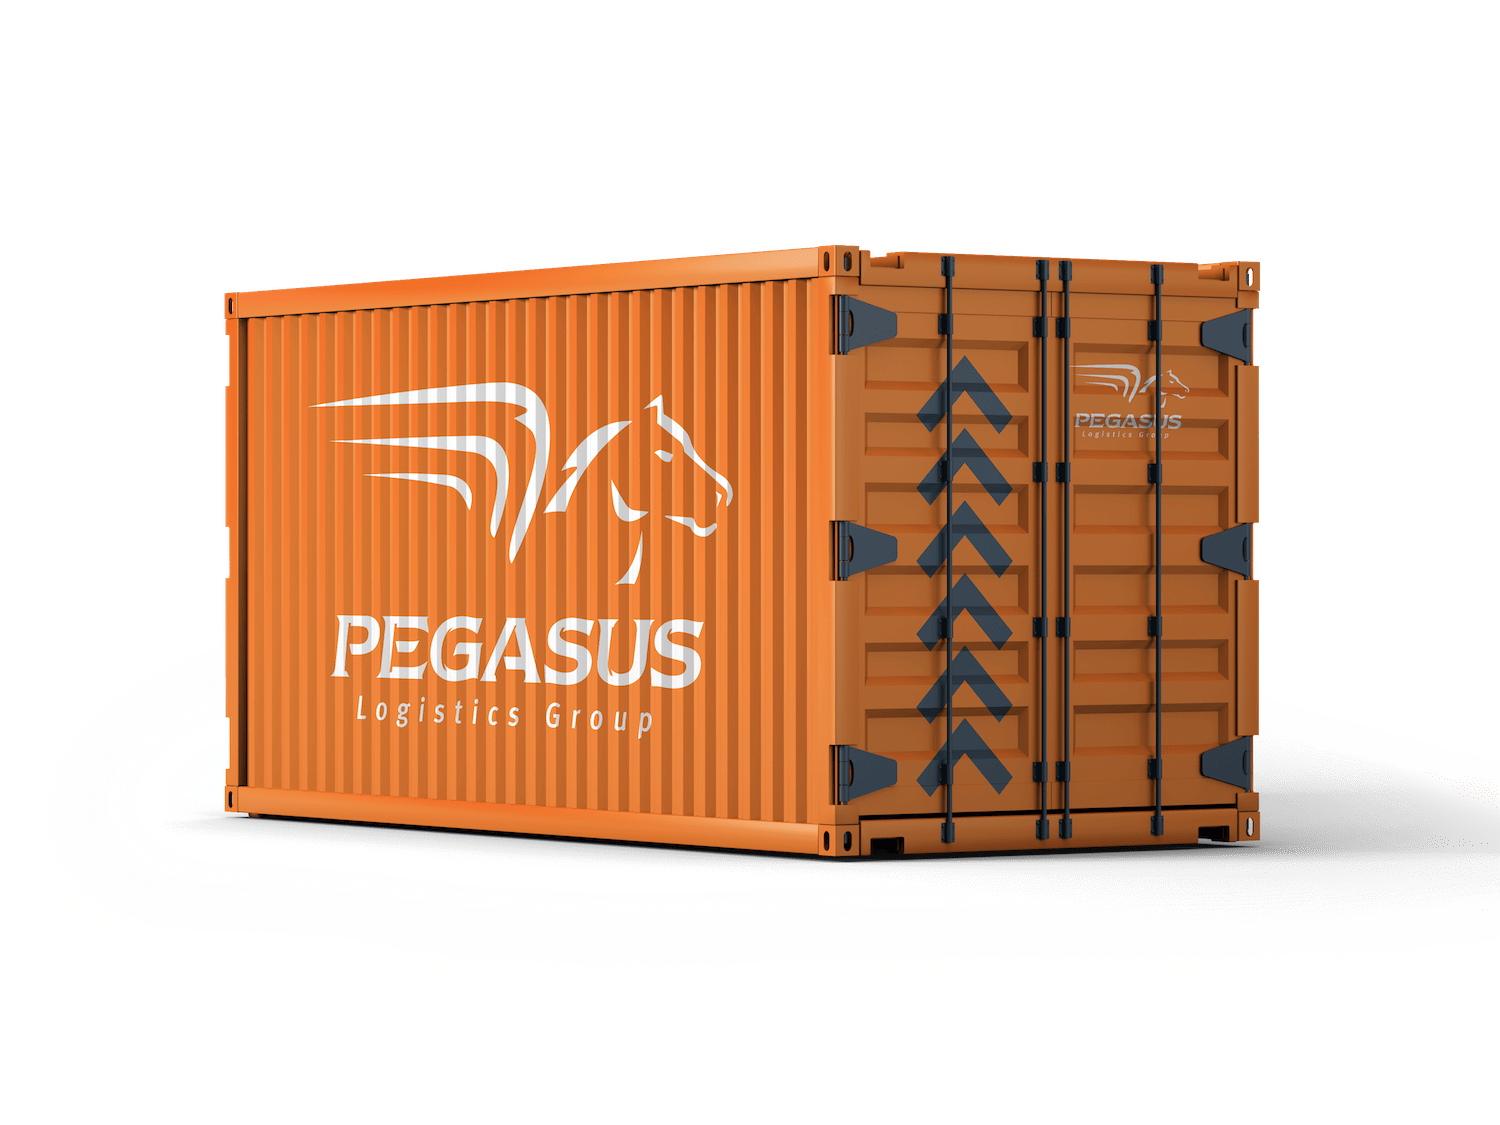 Pegasus Logistics Group - International Logistics Services - Freight Forwarder - Shipping Container